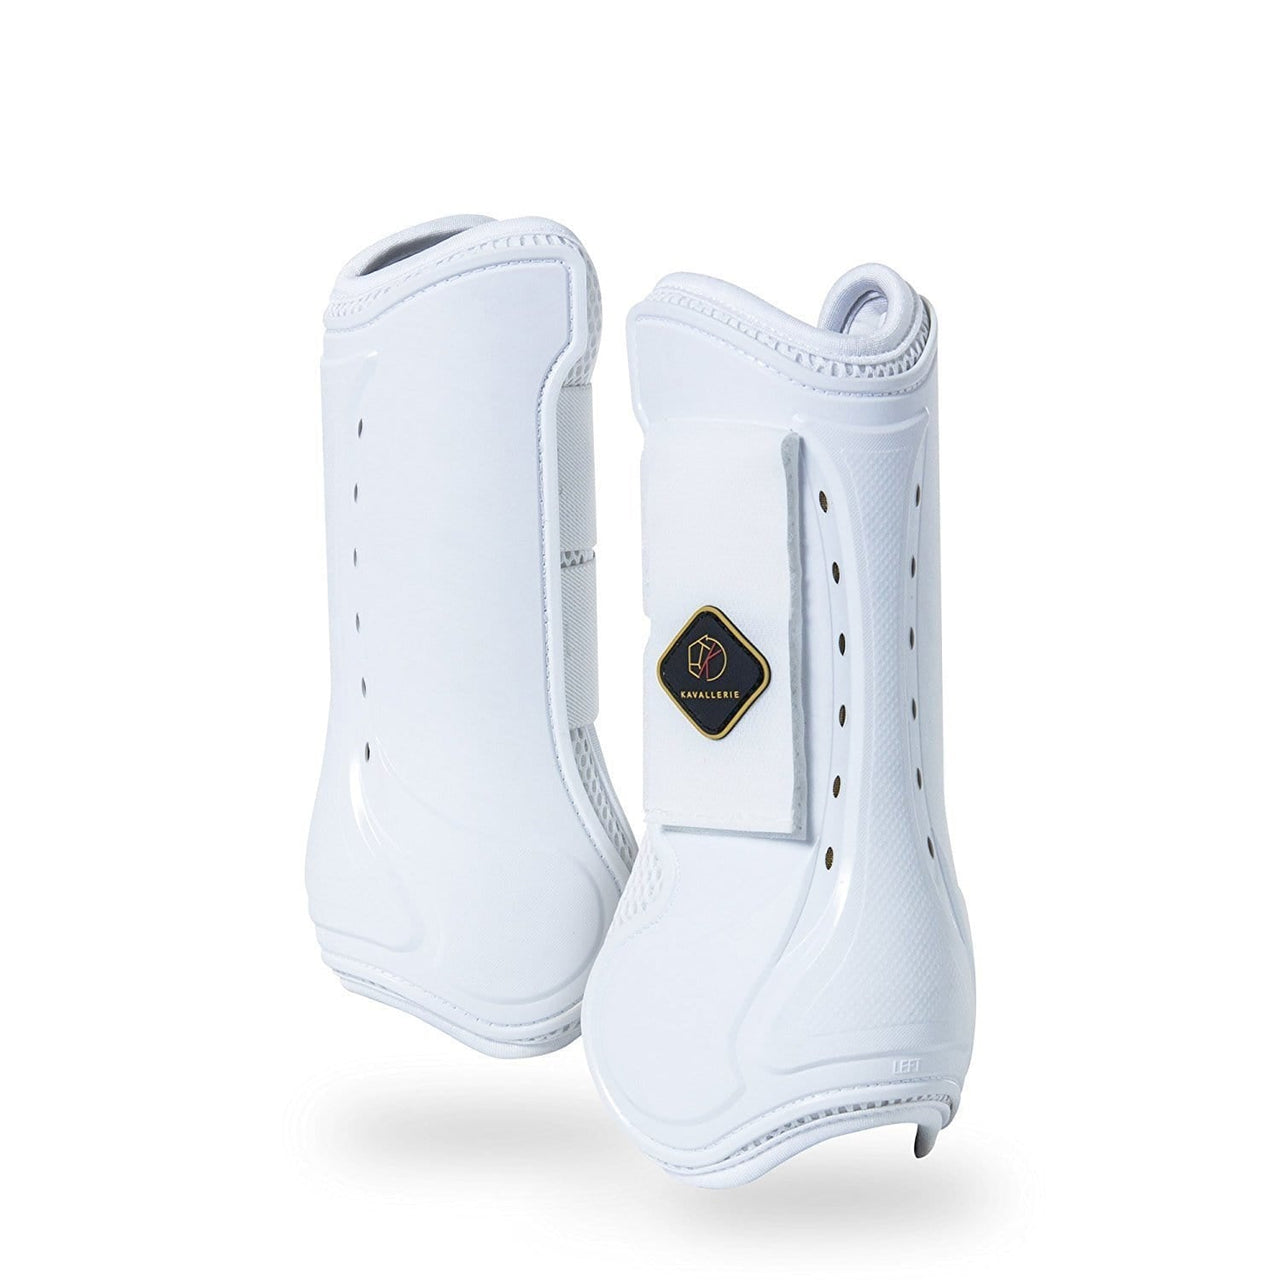 Classic Tendon Boots - Kavallerie